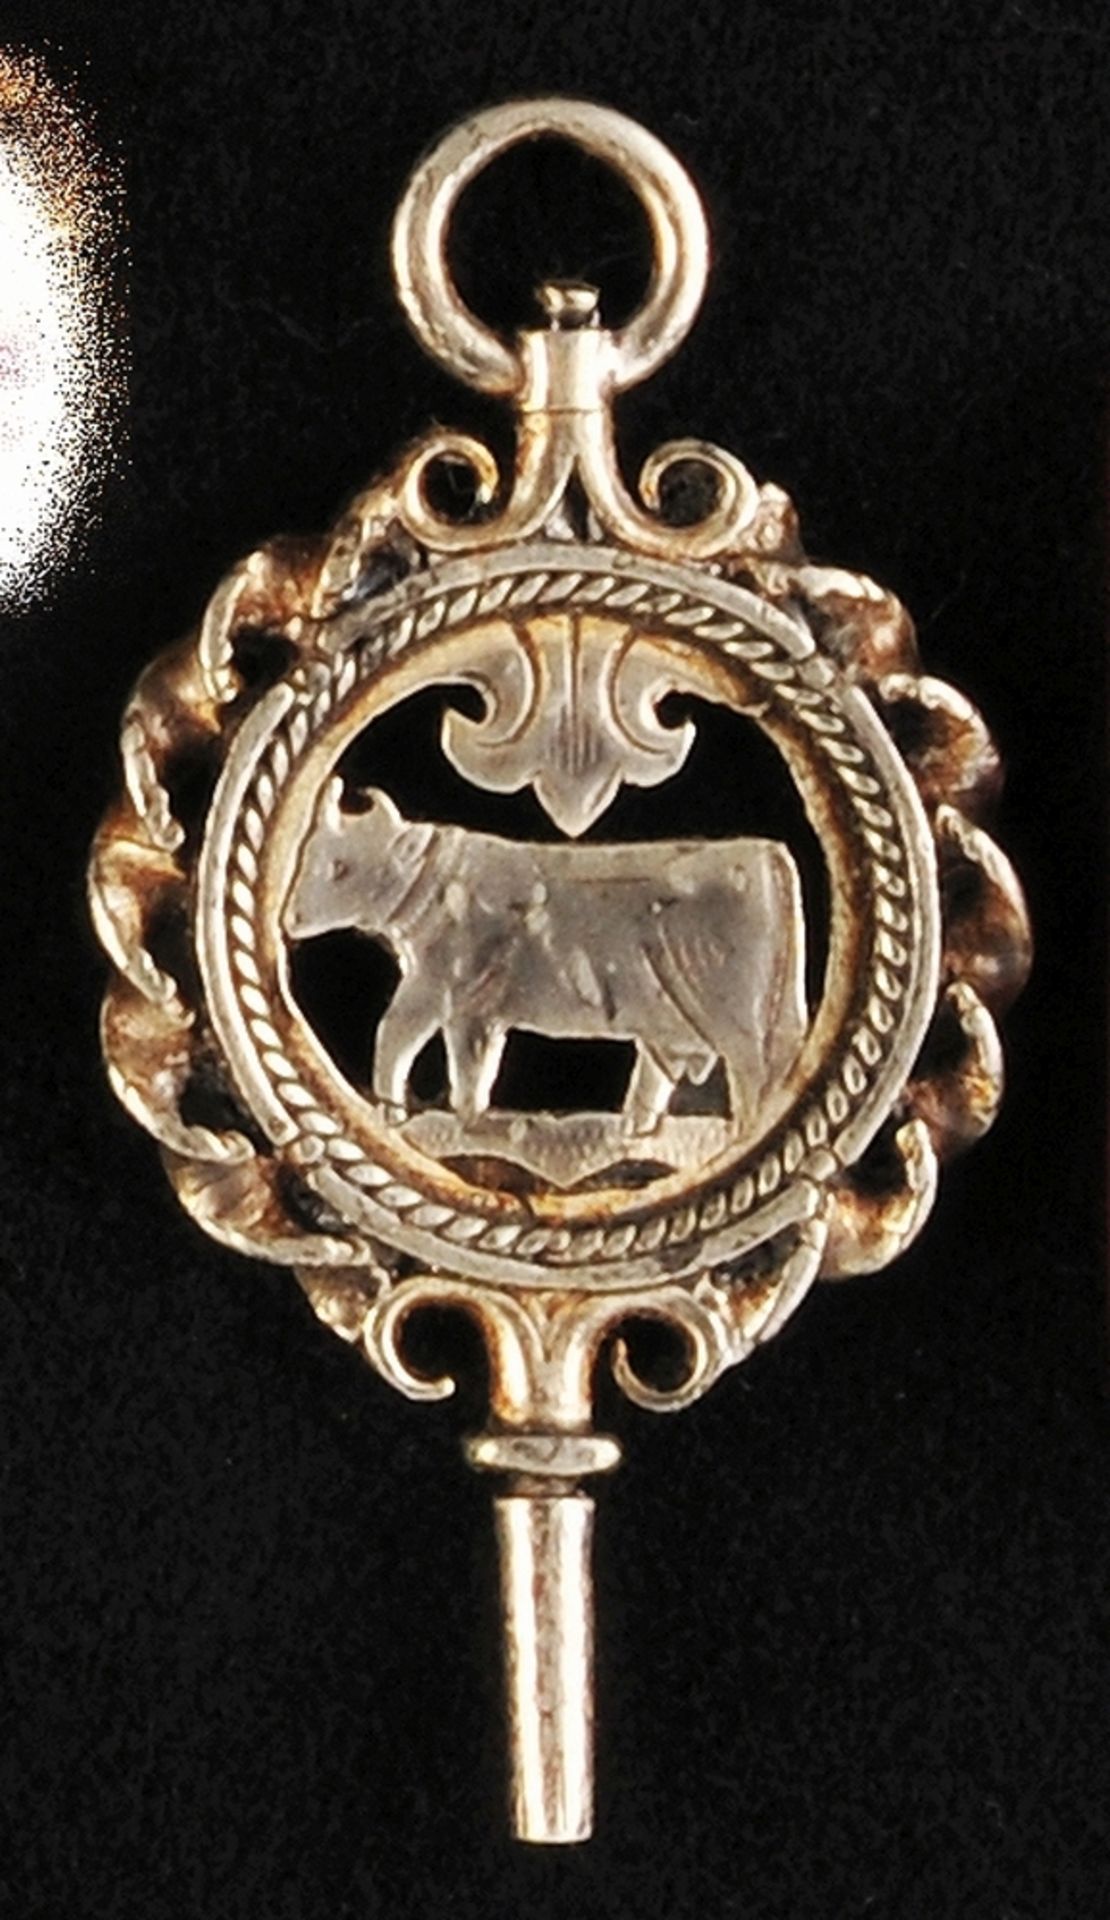 Pocket watch key, silver plated, relief and cut out with depiction of a cow